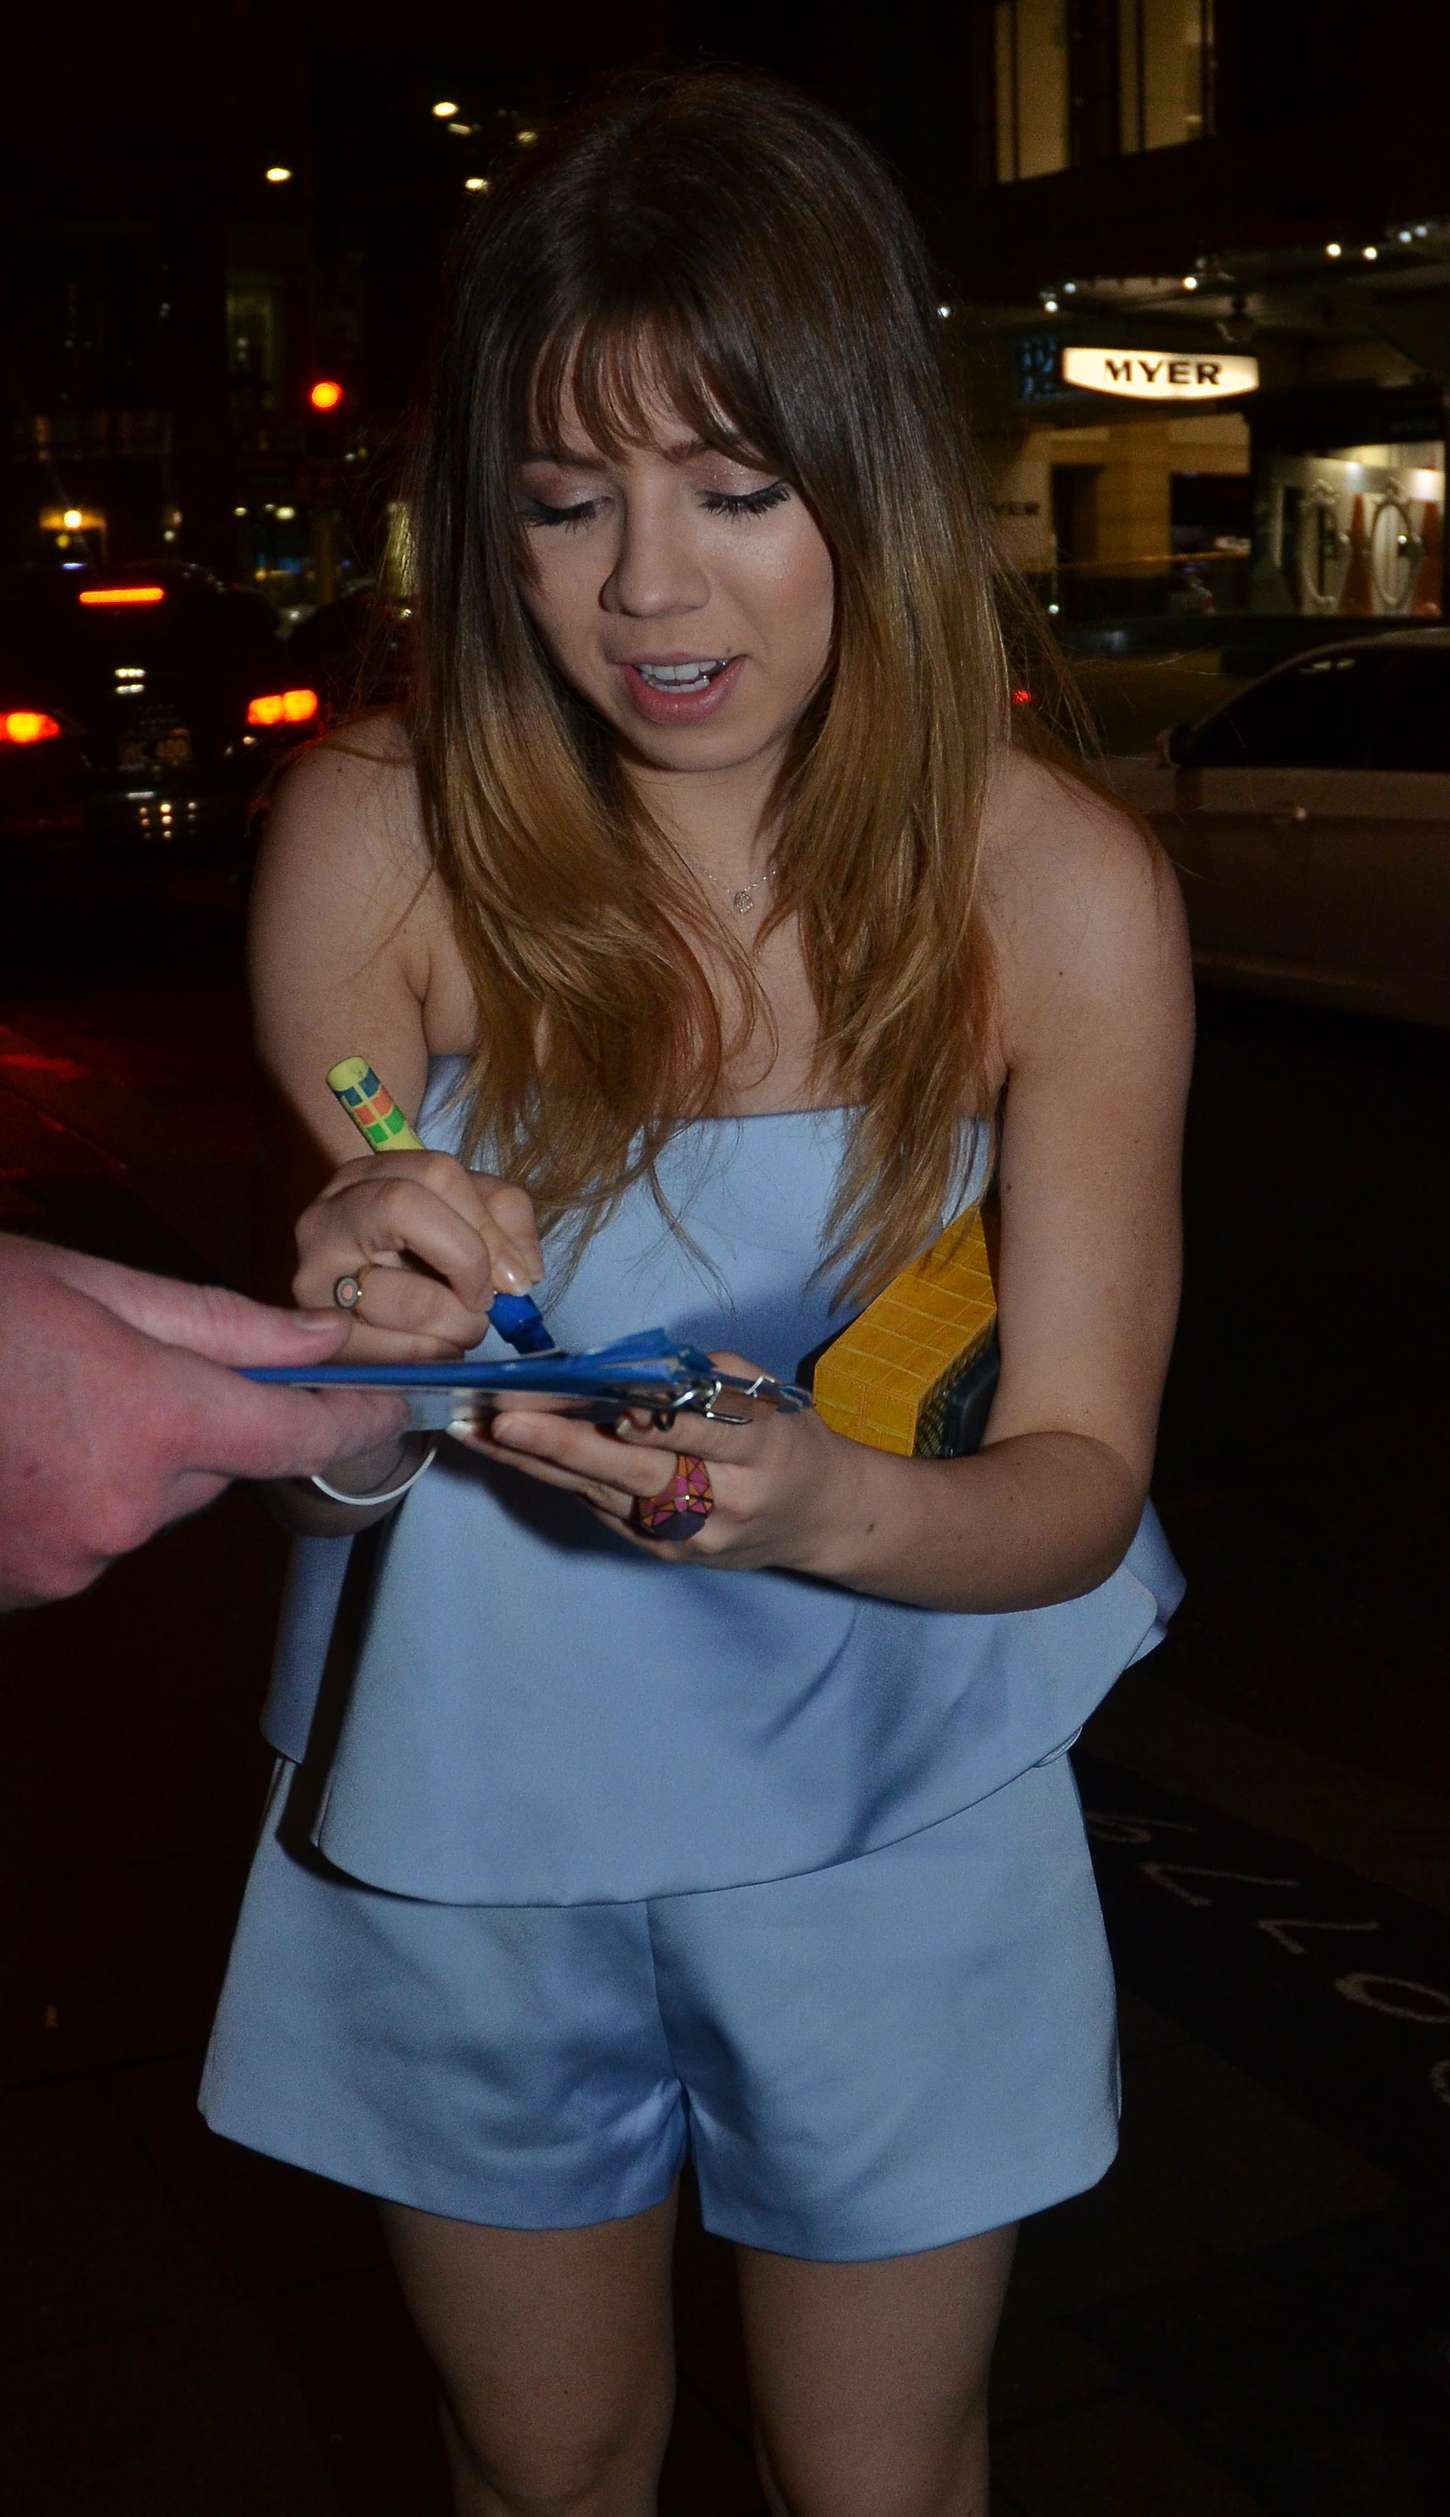 Jennette-McCurdy-Shows-her-Legs--17.jpg